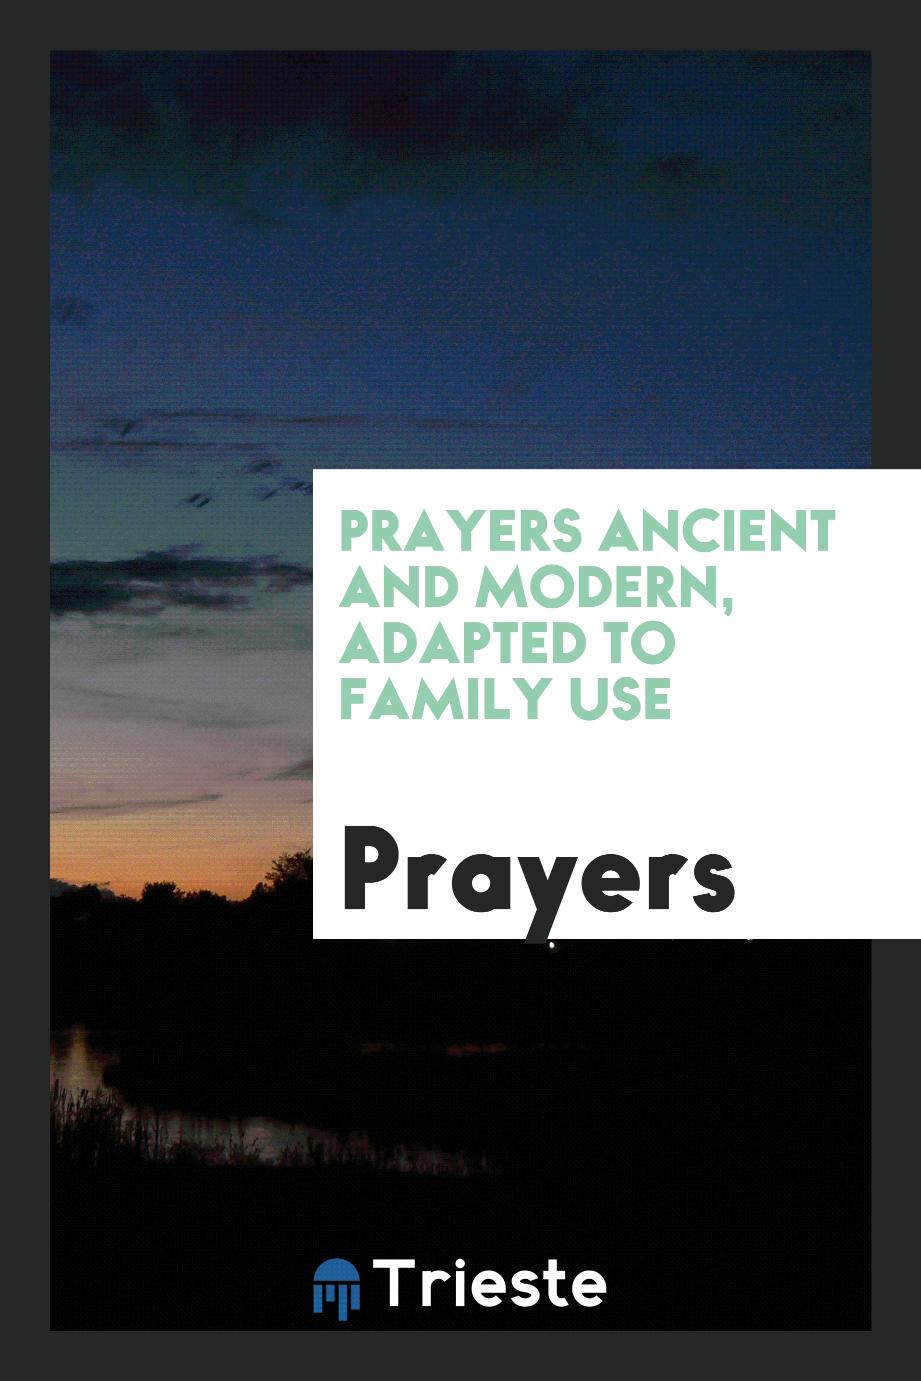 Prayers Ancient and Modern, Adapted to Family Use